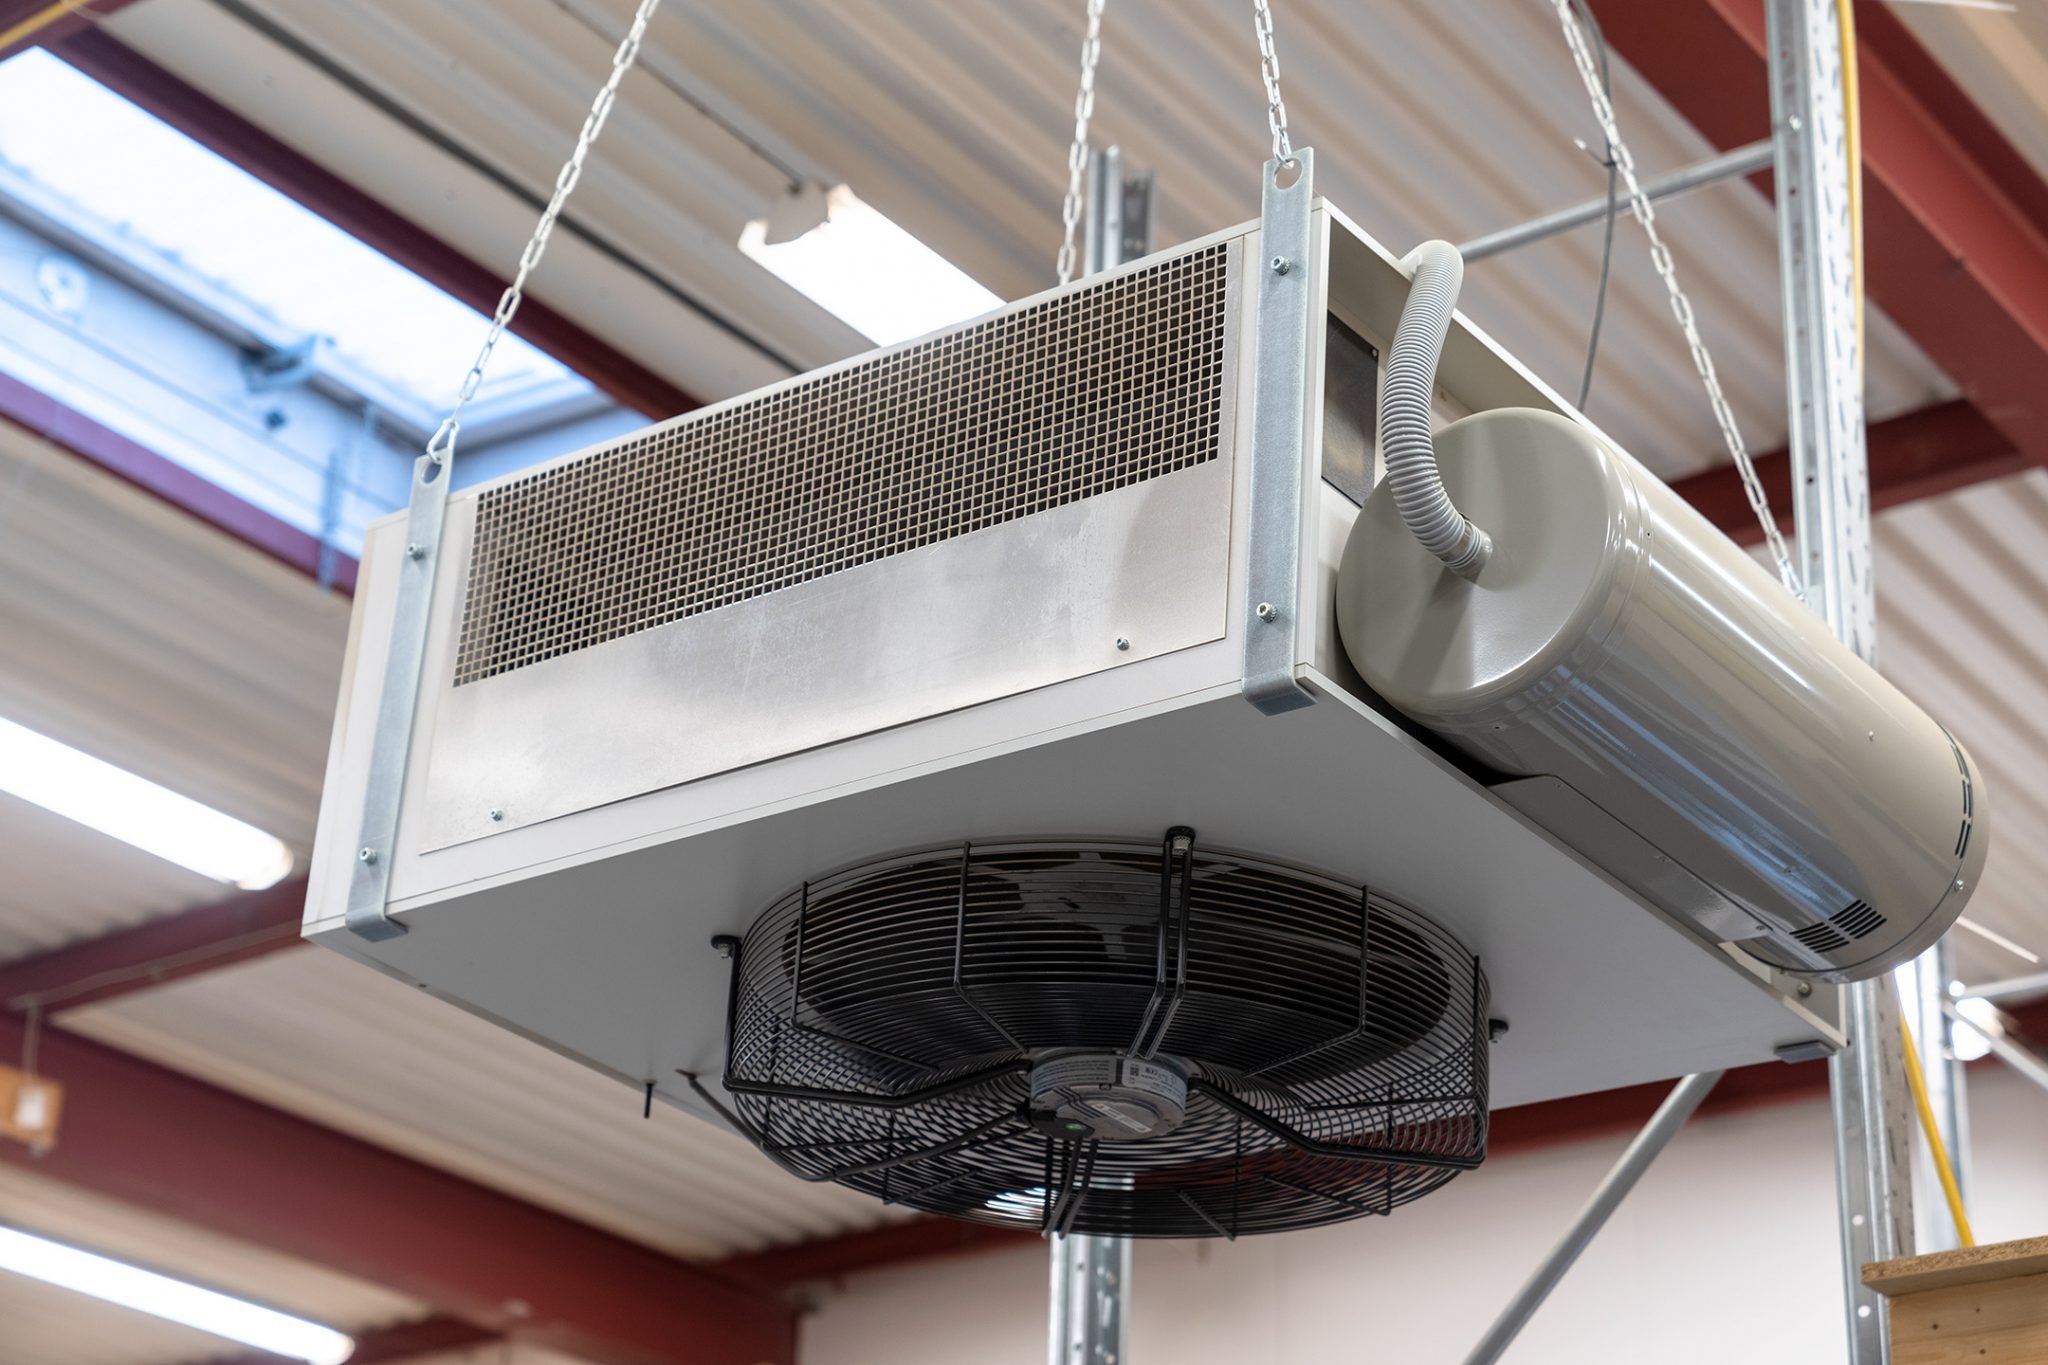 A groovy industrial air cleaner application